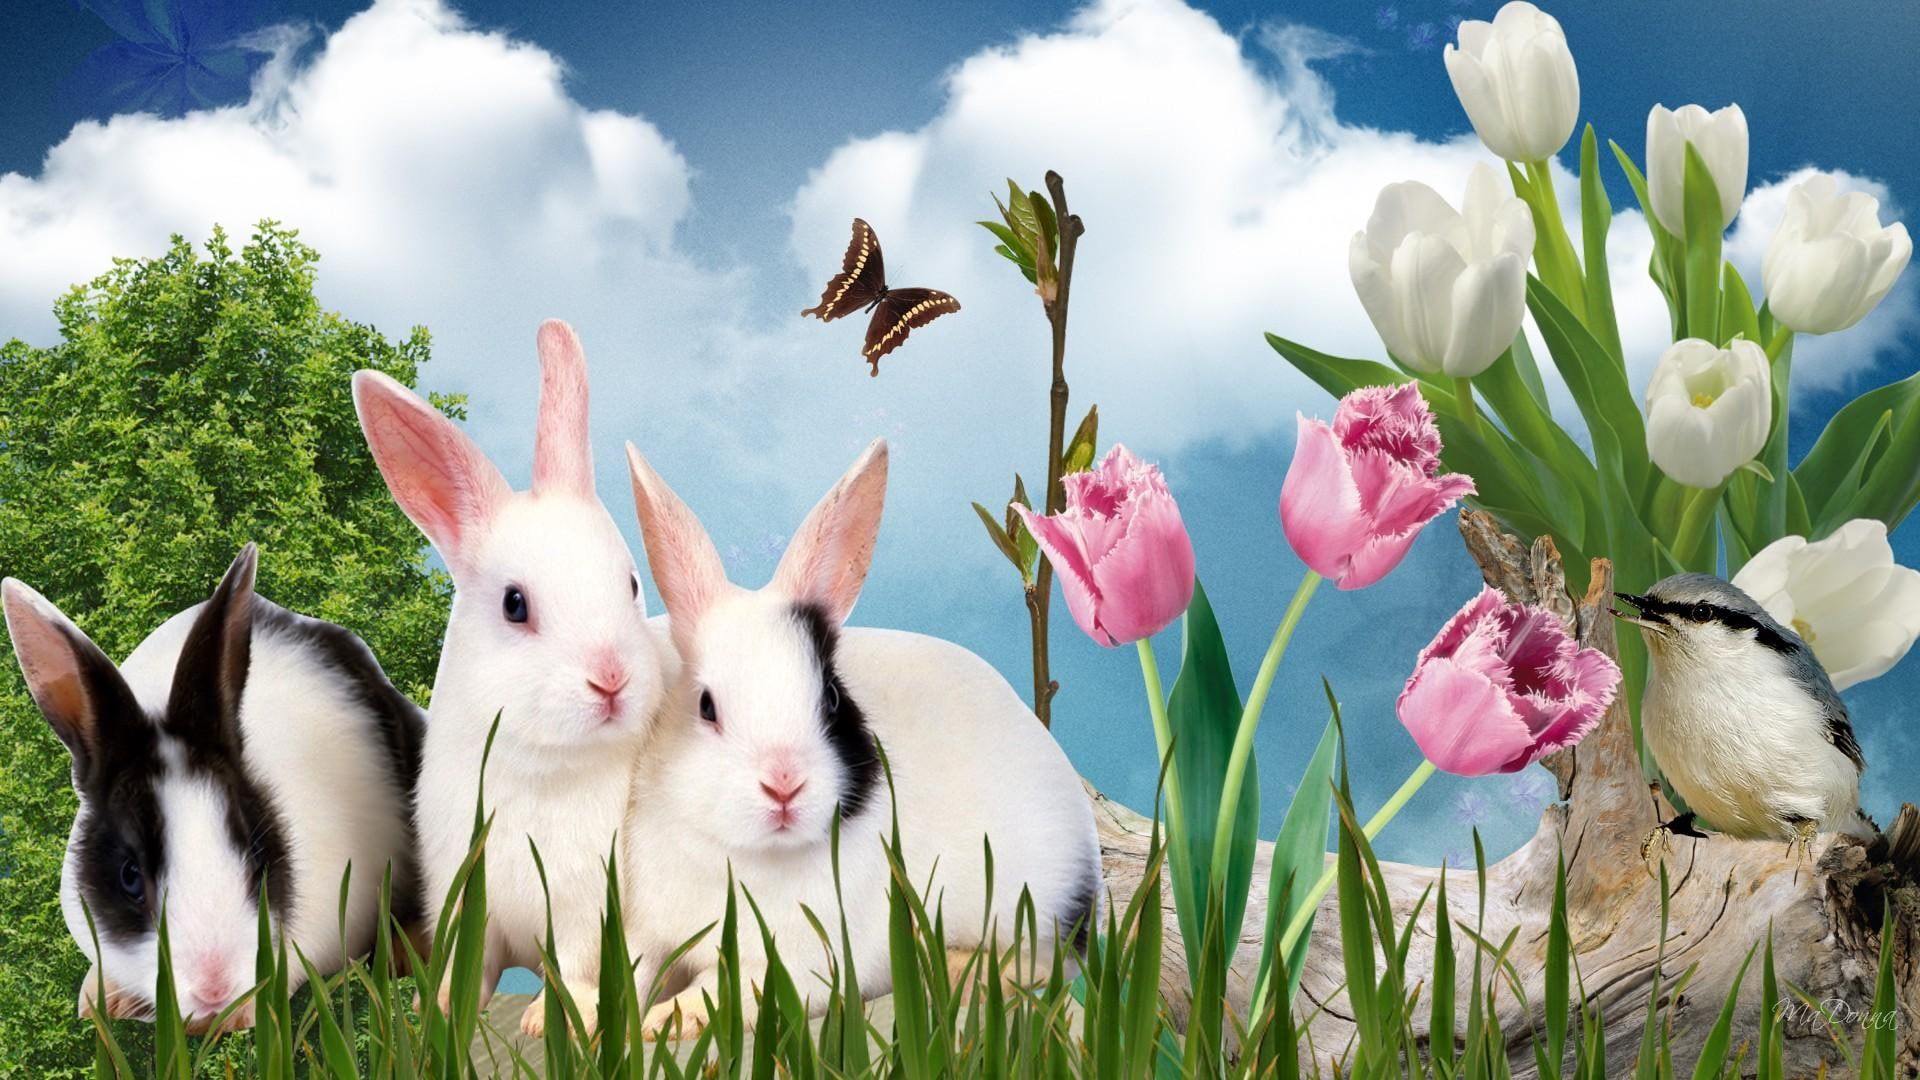 Spring Bunnies, Grass, Tulips, Easter